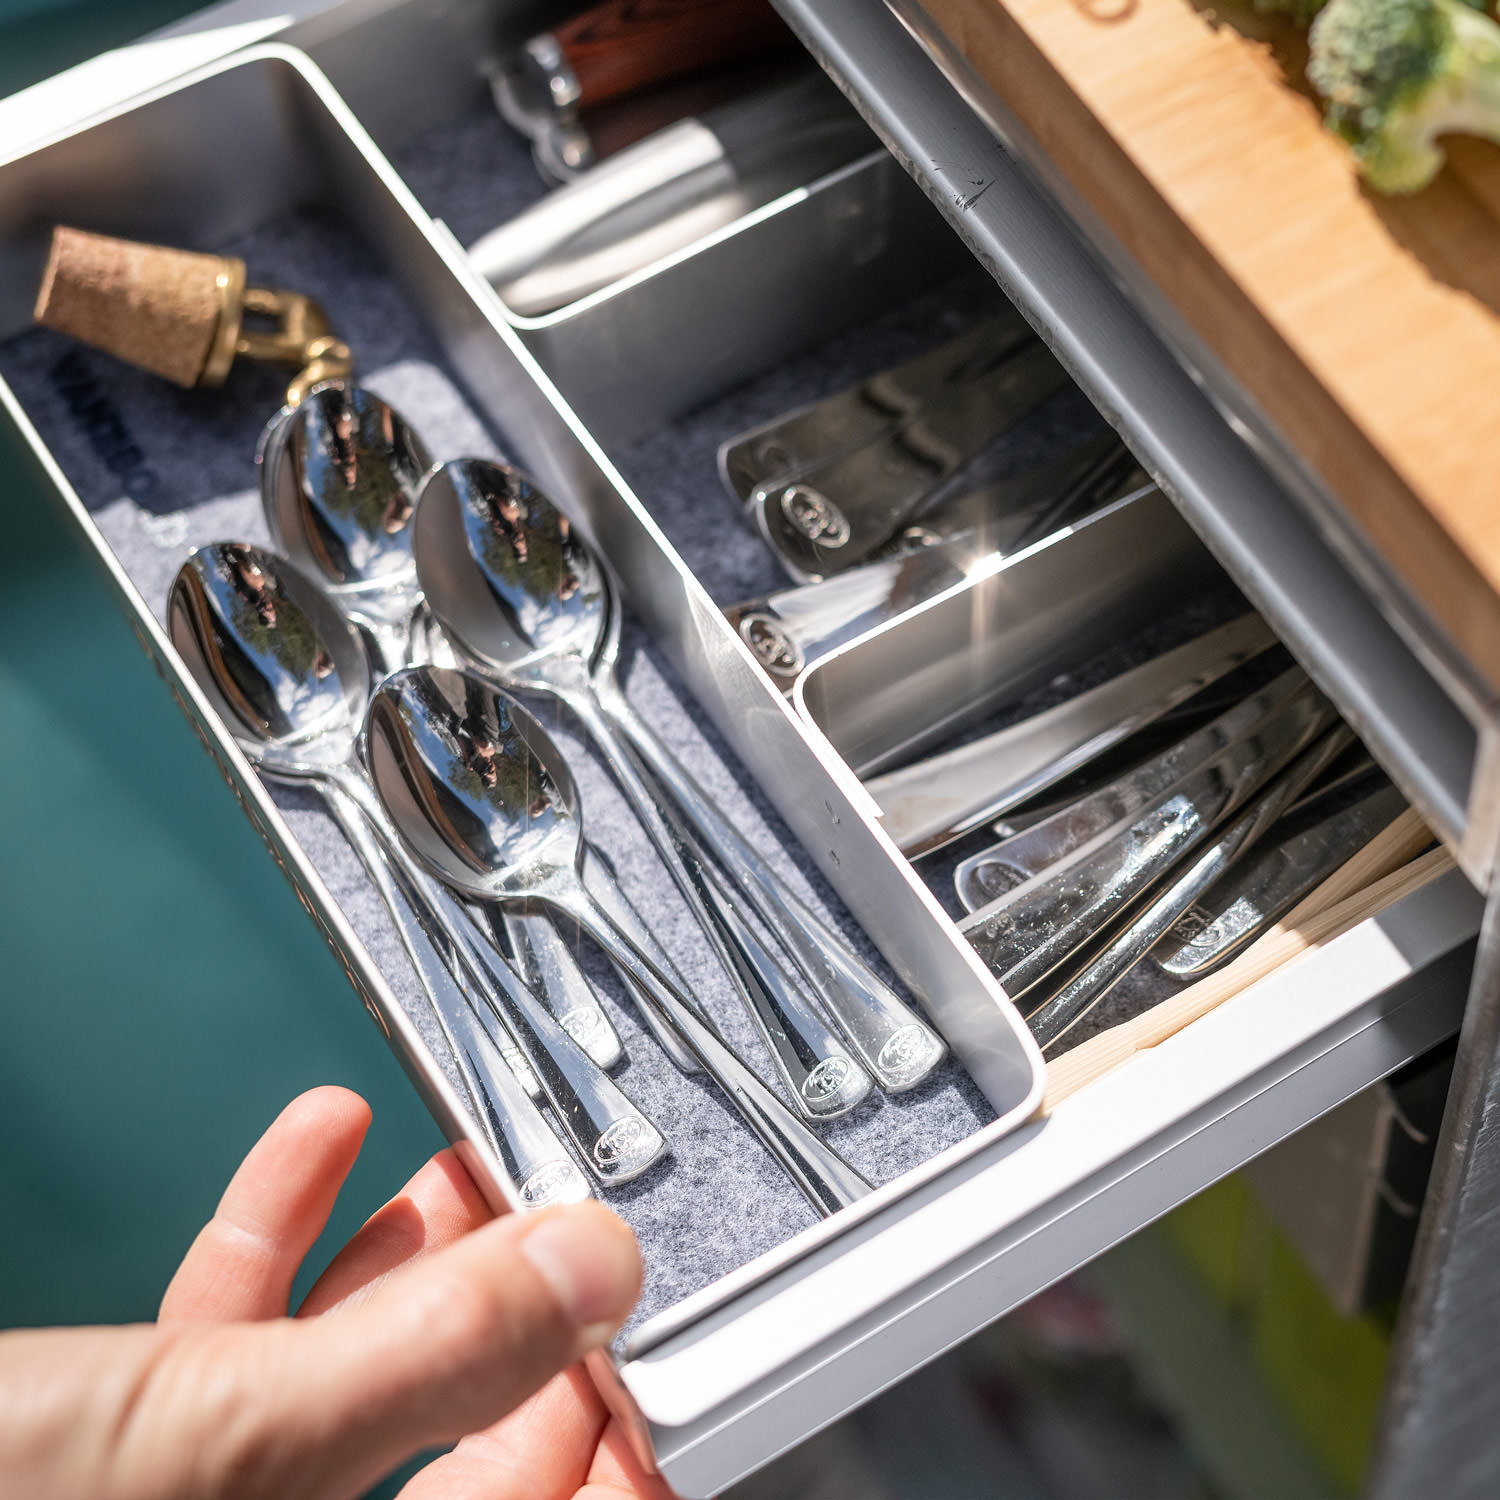 Aluminum Drawer S with Cutlery Insert/ Organizer for Airline Trolleys & Aviation Boxes KSSU